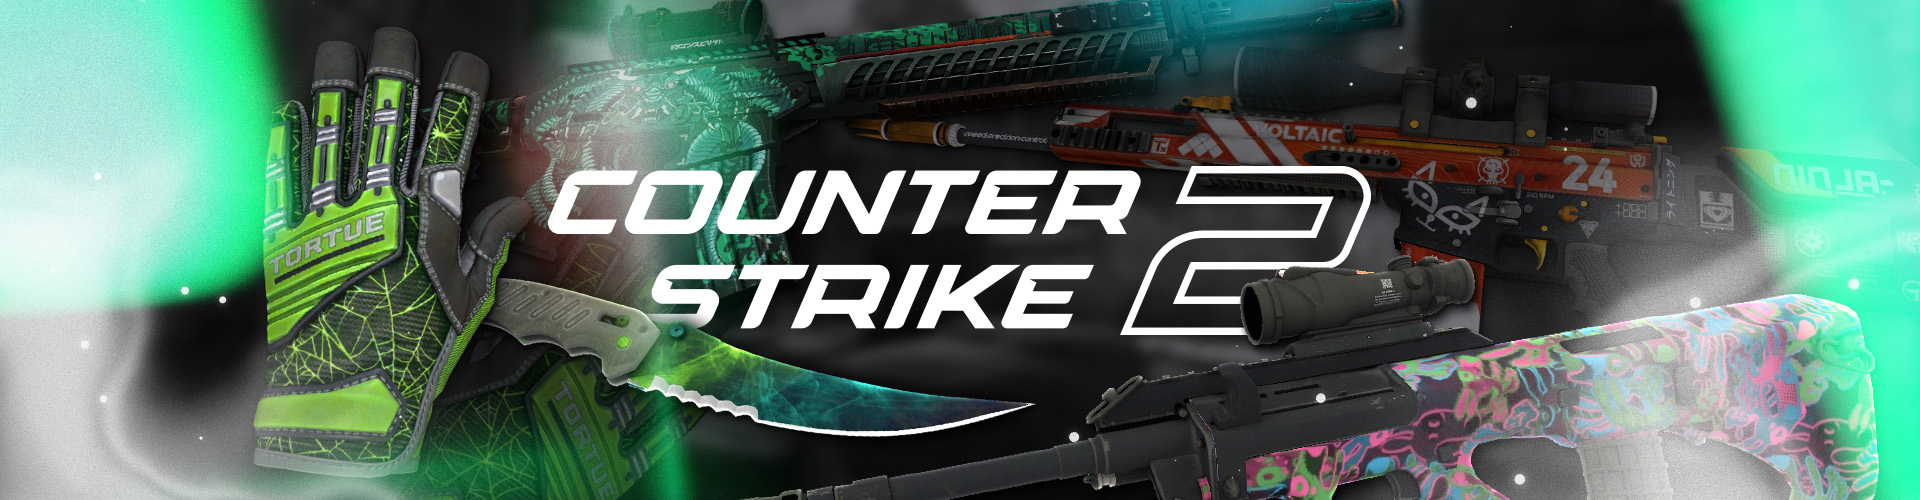 How to Get Cases in CS2: Investing in Counter-Strike 2 Cases for Success